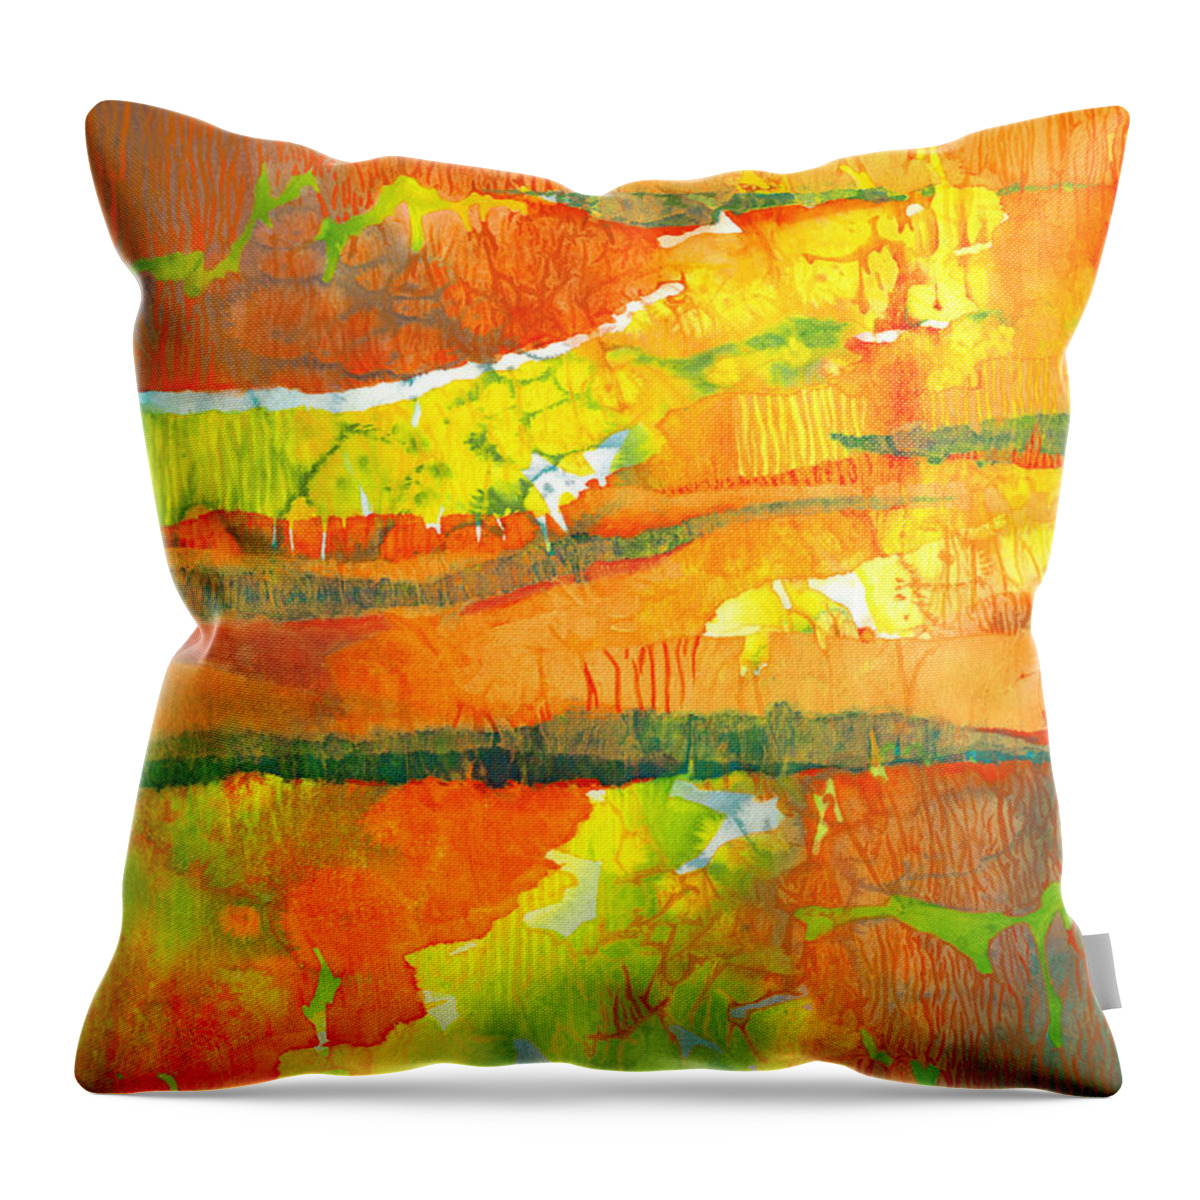 Strata Throw Pillow featuring the painting Strata by Lynda Hoffman-Snodgrass